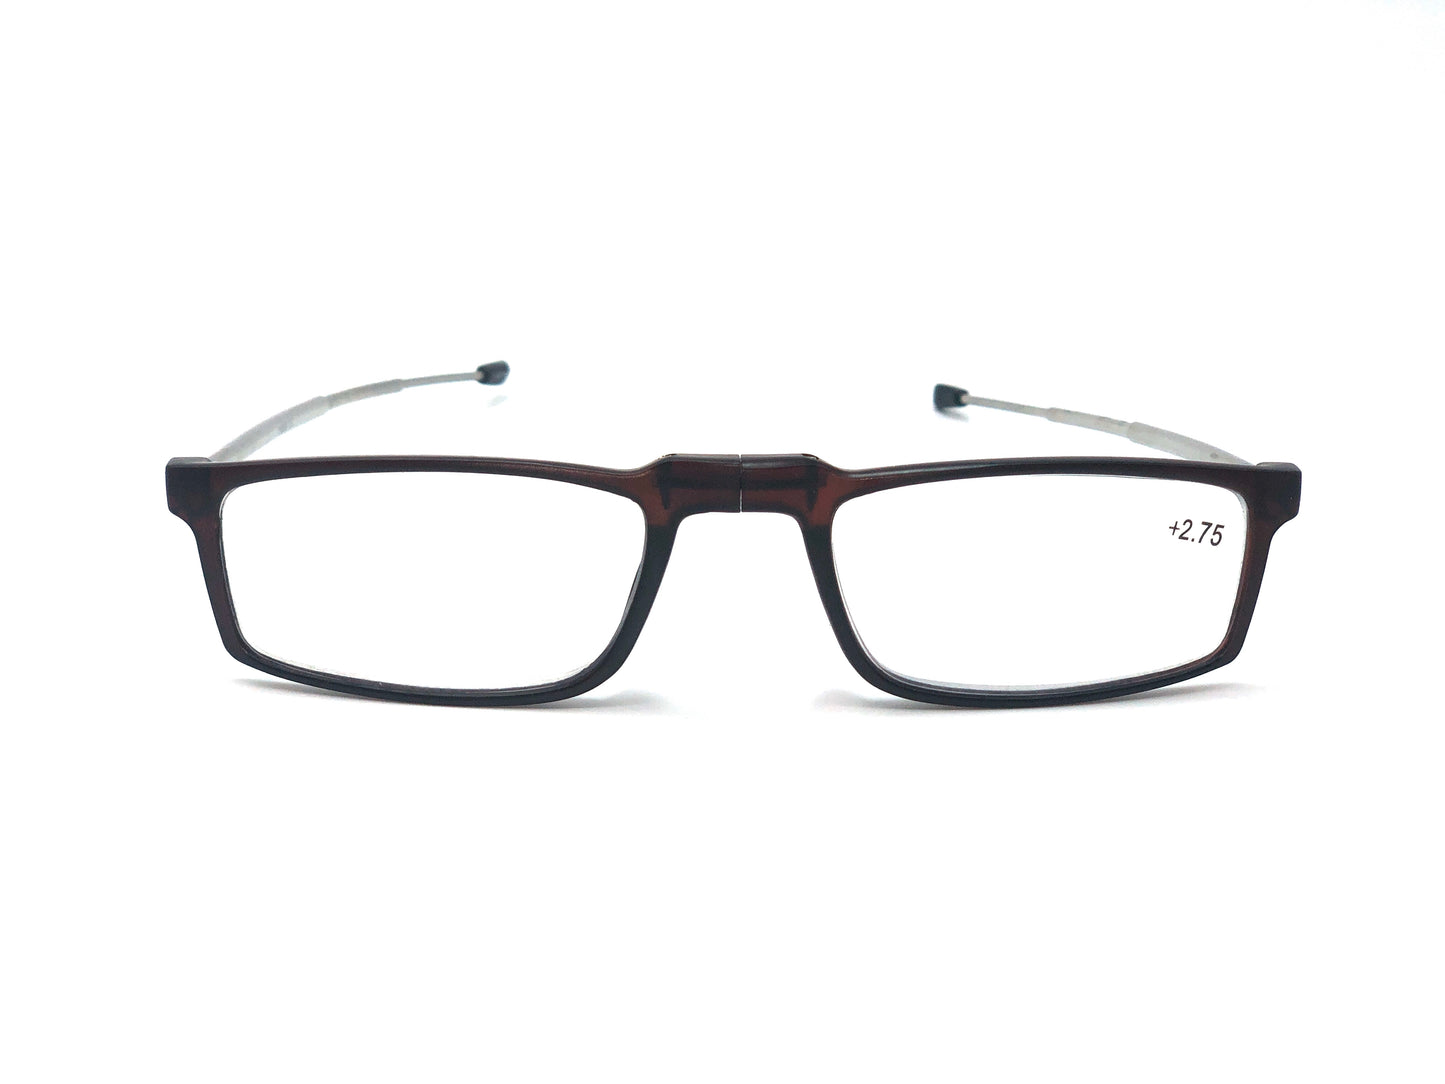 Allora Foldable Light Weight Reading Glasses with Prescription